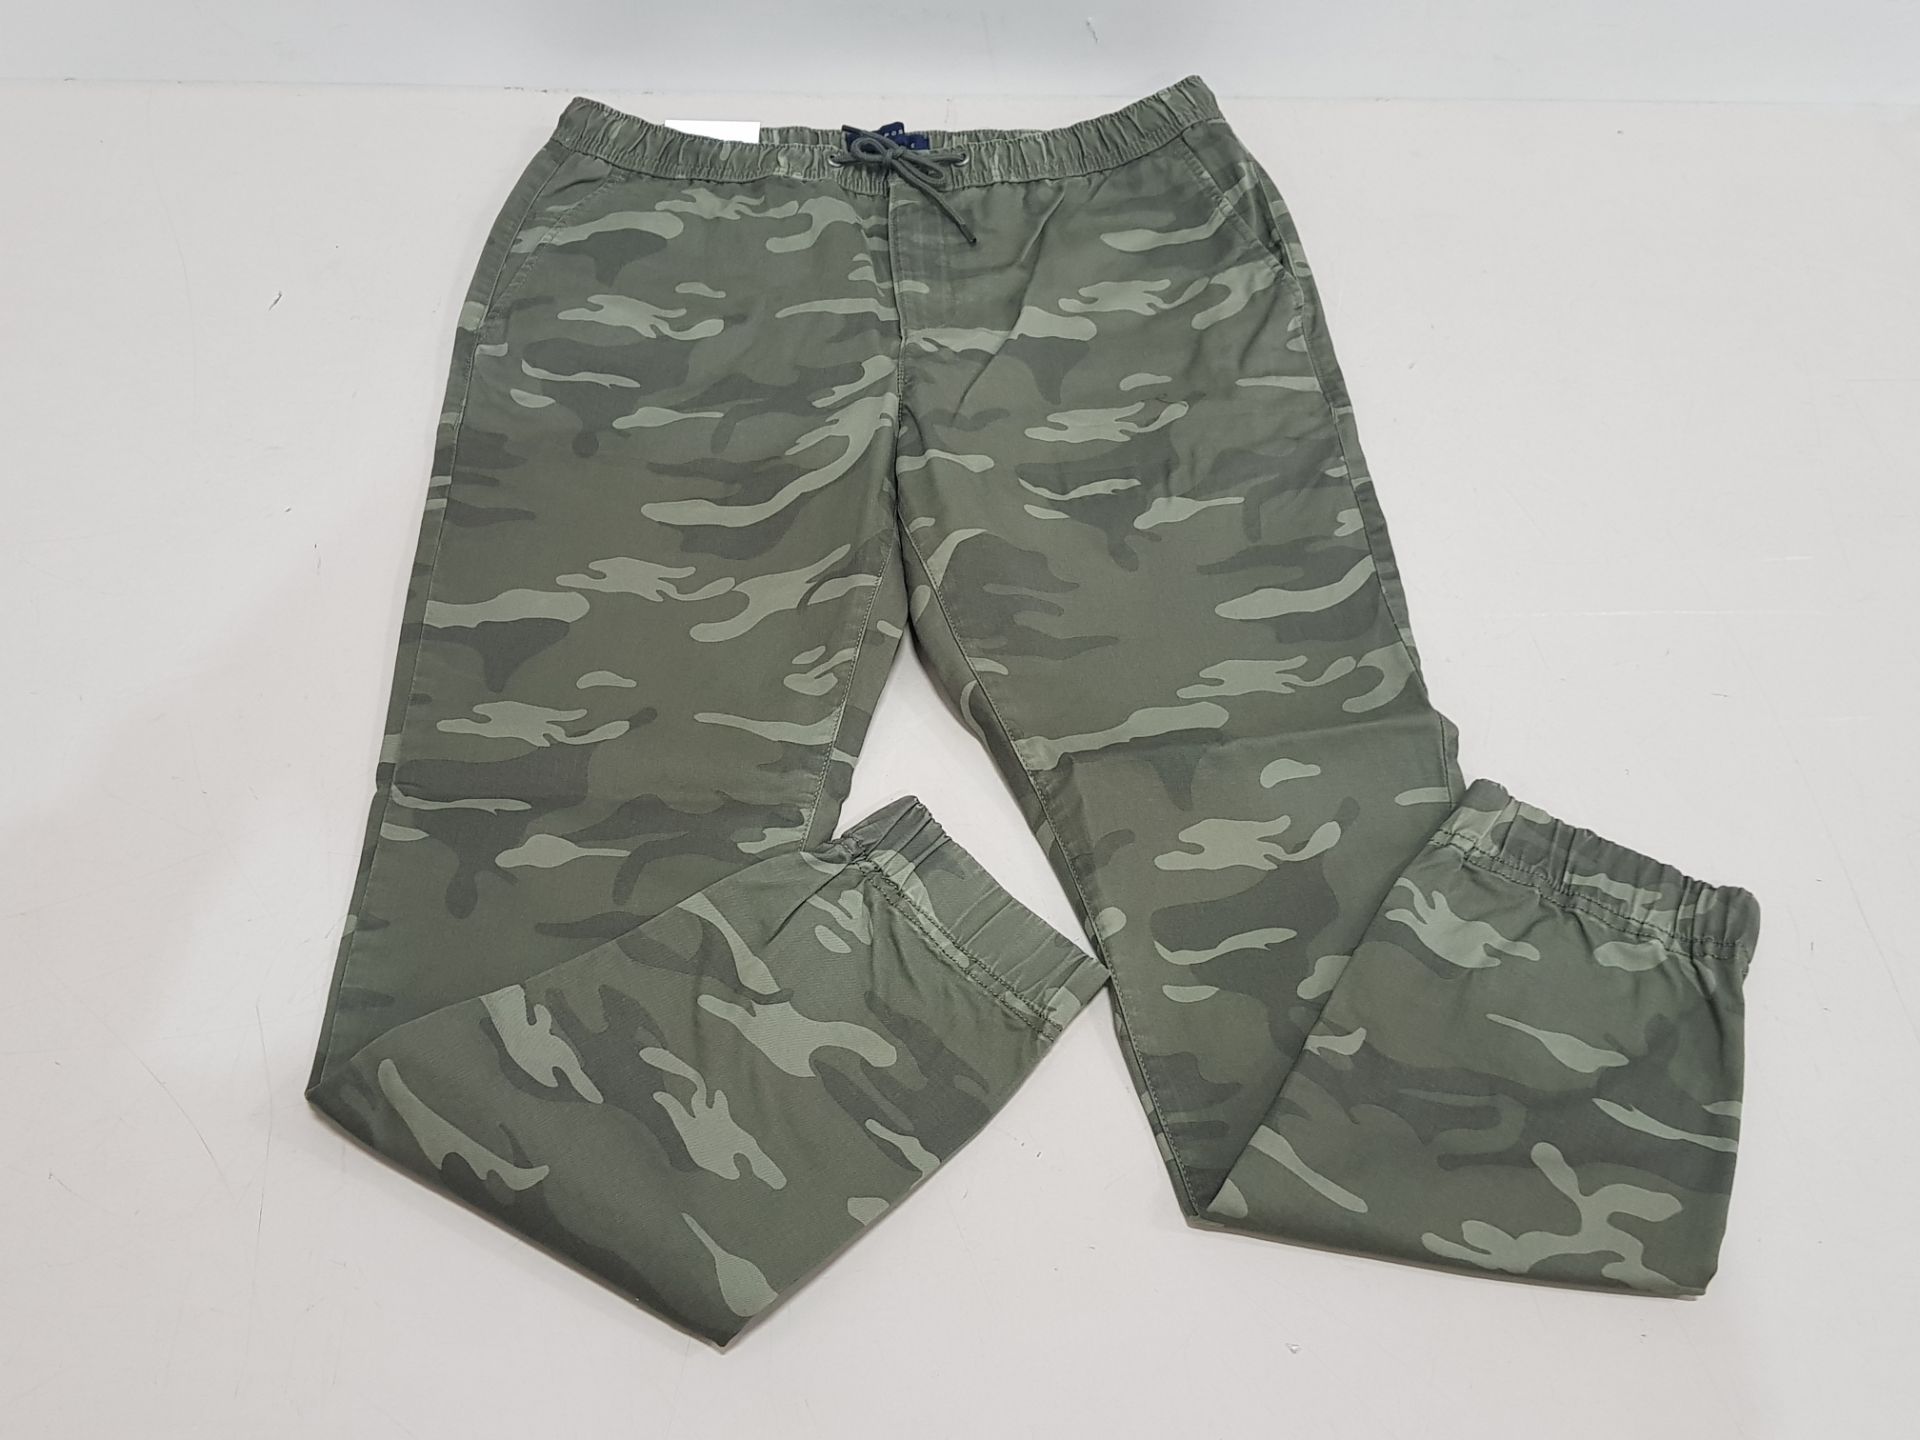 39 X BRAND NEW AEROPOSTALE MENS ANKLE CUFF CHINOS CAMO PRINT SIZES 22 IN SIZE 34R AND 17 IN SIZE 32R